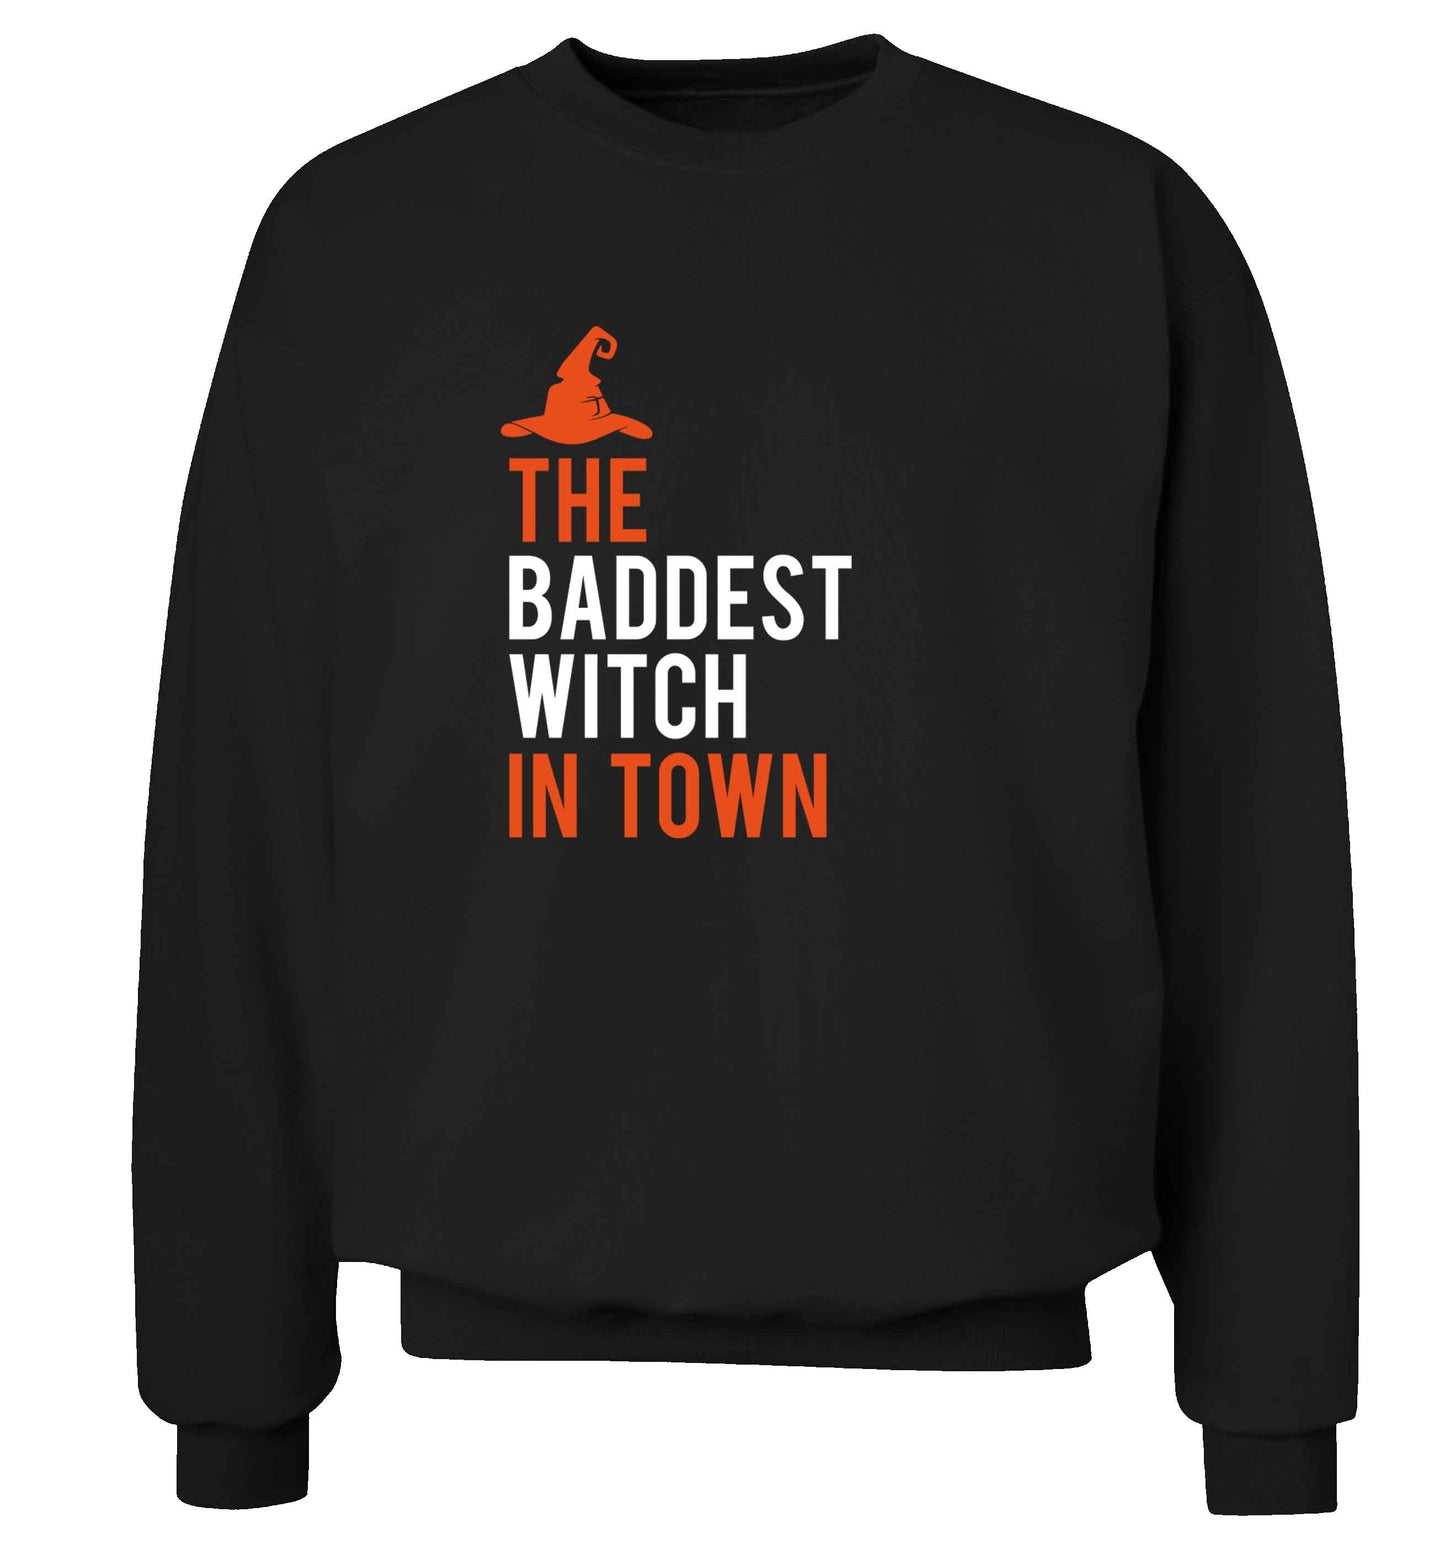 Badest witch in town adult's unisex black sweater 2XL